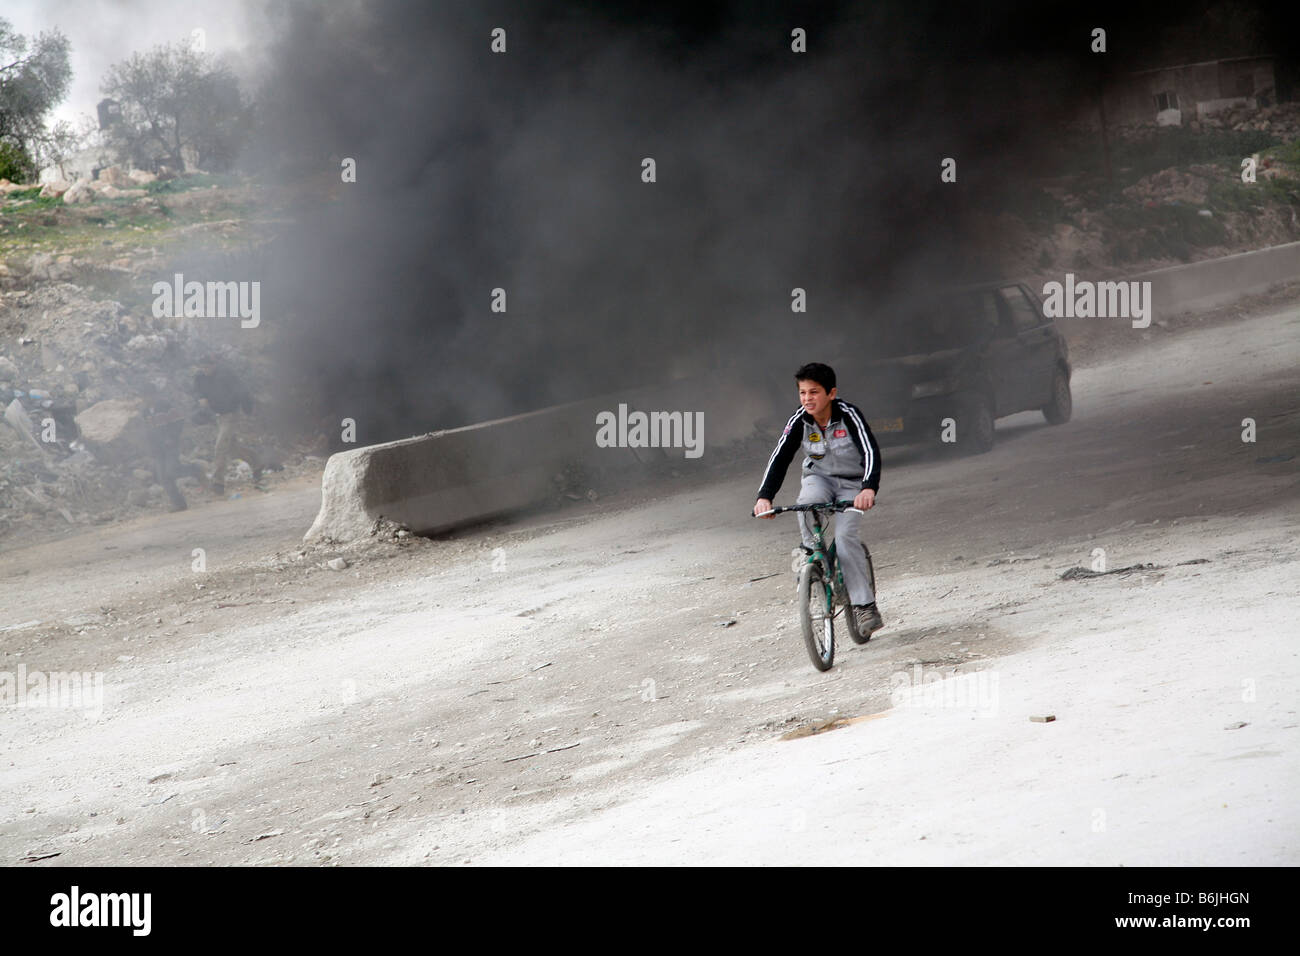 A Palestinian boy cycles through smoke from burning tyres during a protest in the West Bank. Stock Photo